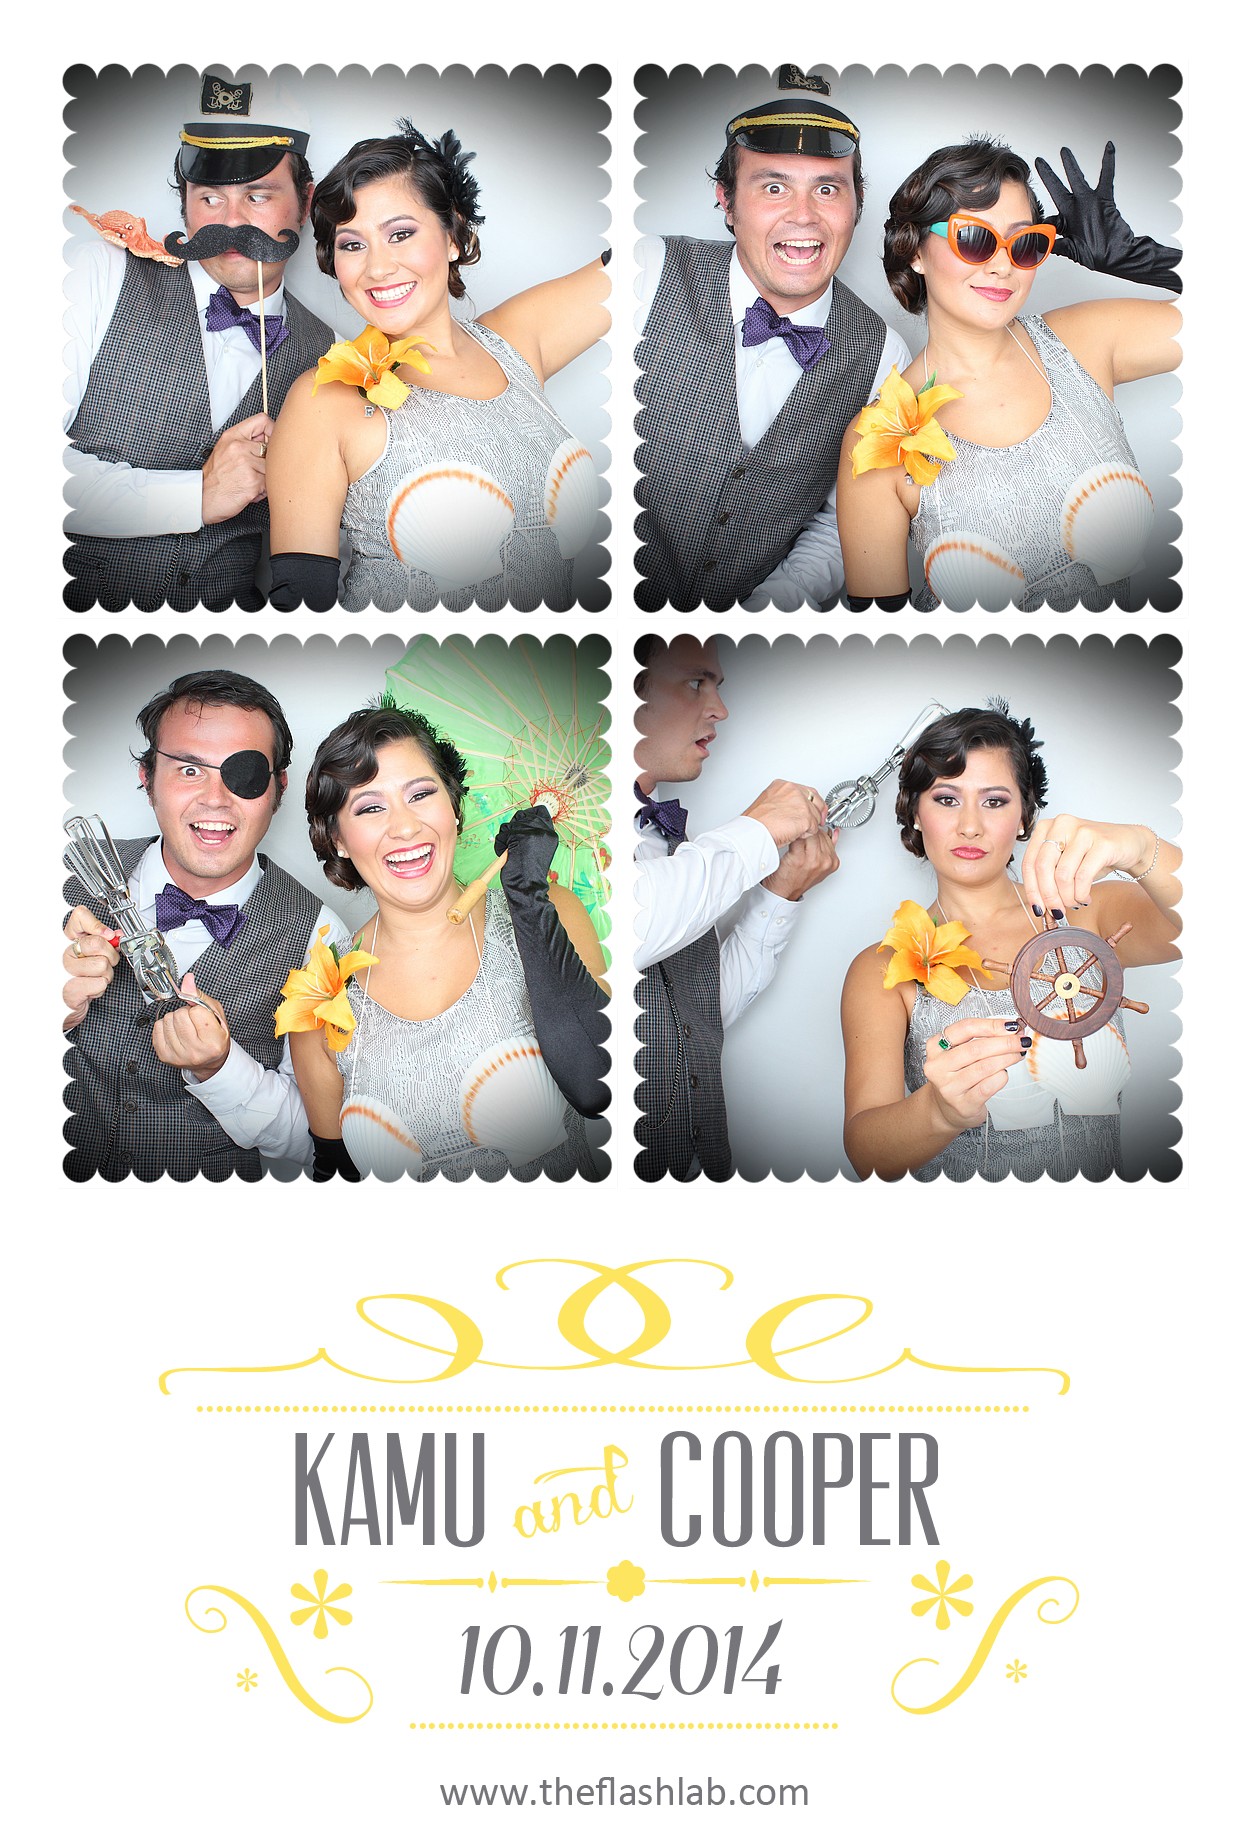 Copy of oahu photo booth